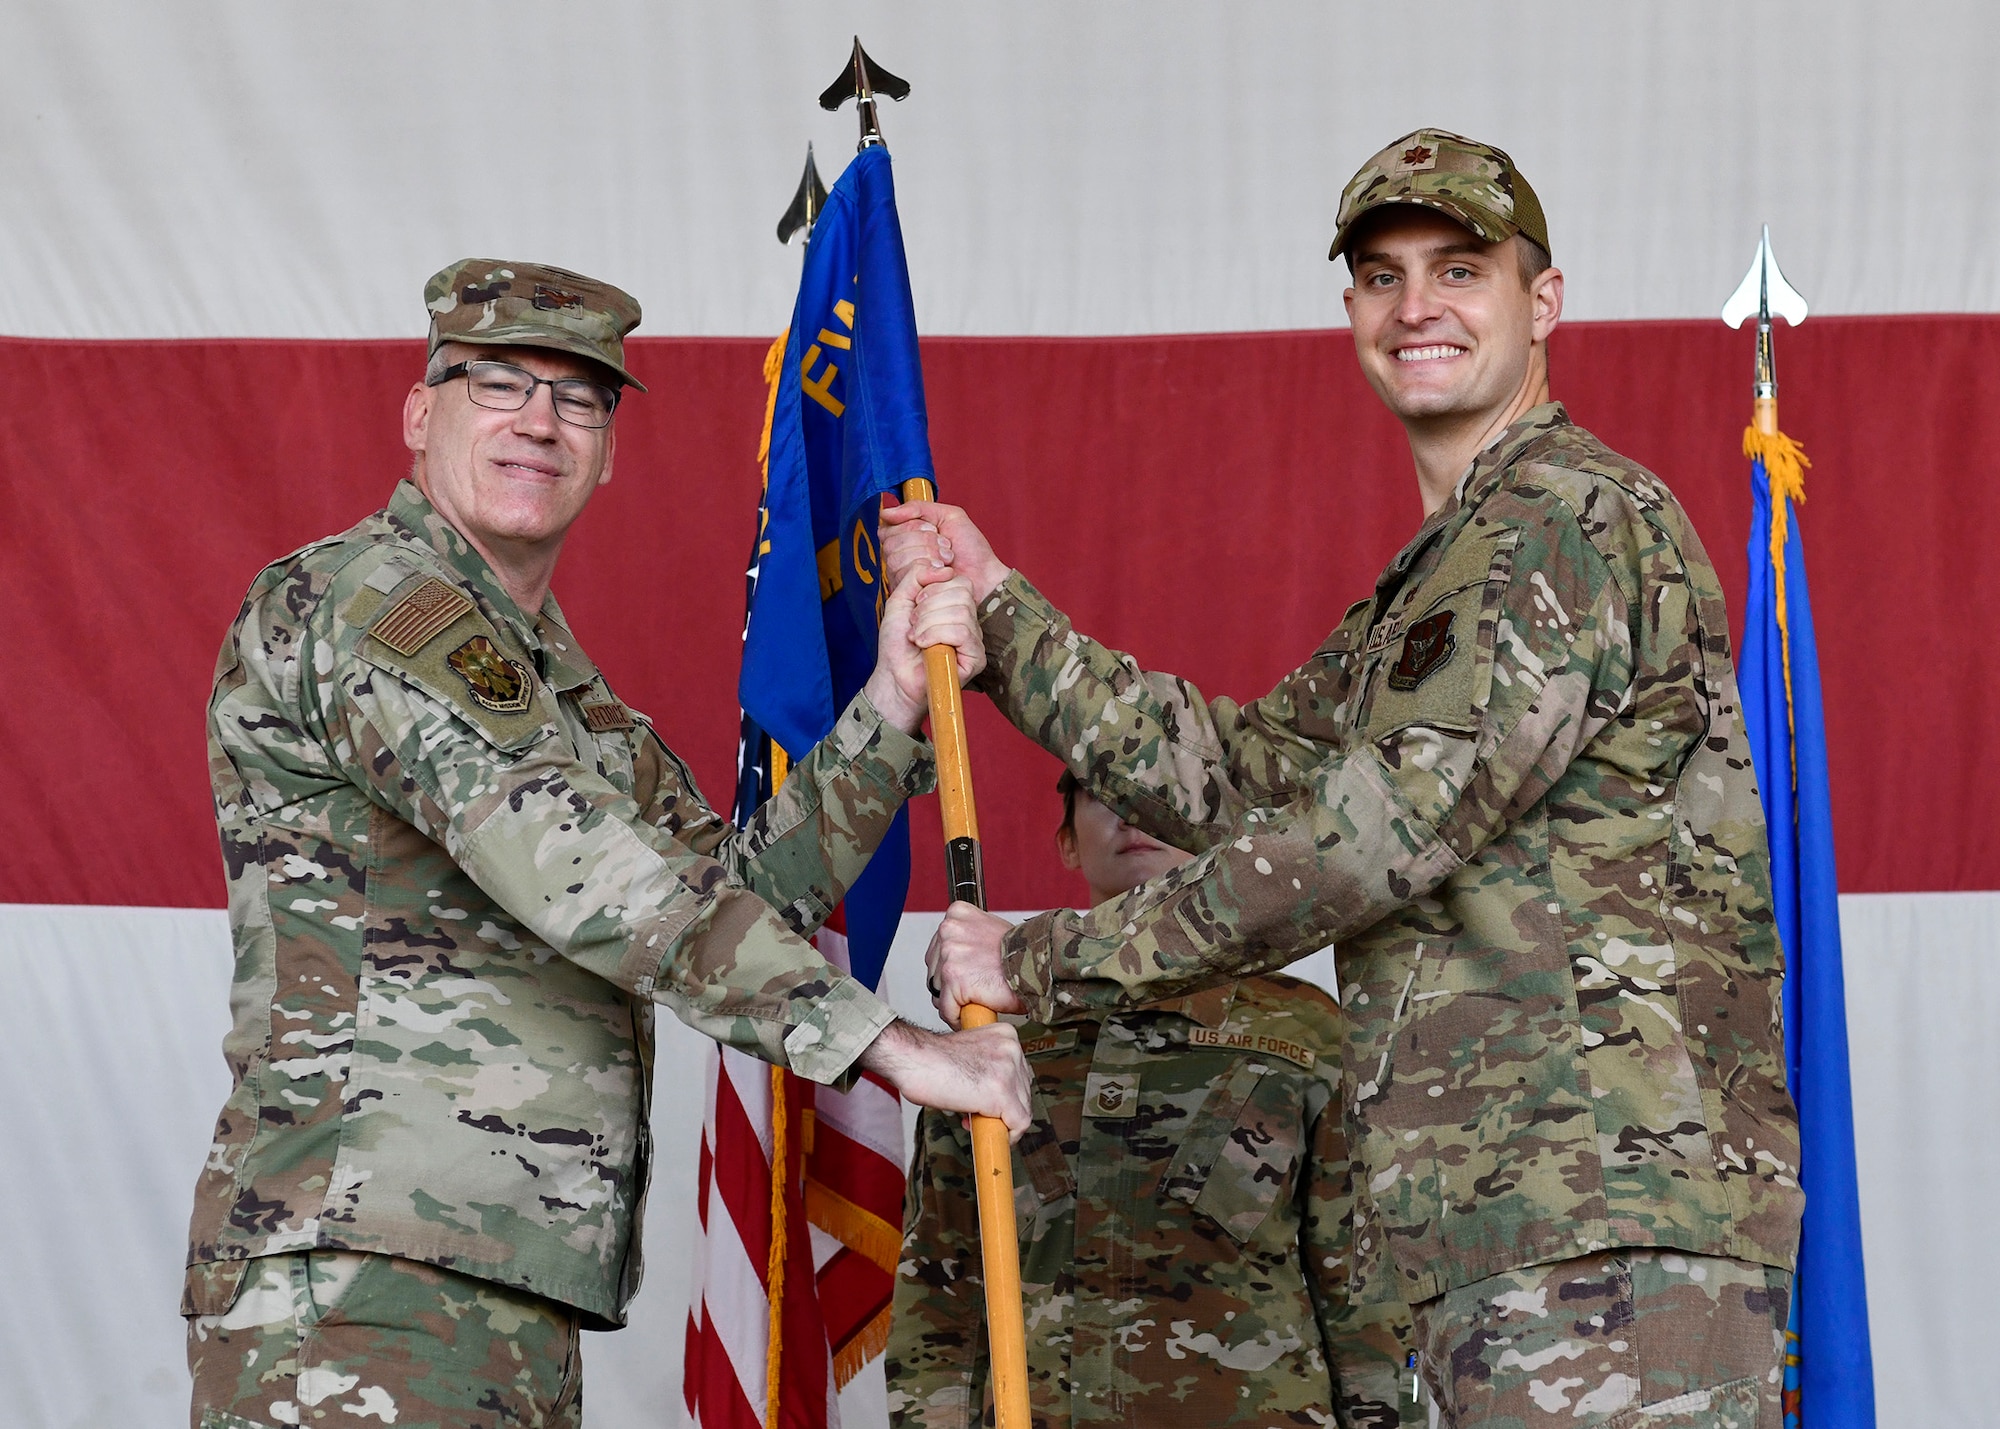 The 944th Civil Engineer Squadron held an assumption of command ceremony to welcome Reserve Citizen Airman Maj. Corey Lohmiller, as their new squadron commander at Luke Air Force Base, Arizona, November 6, 2021.